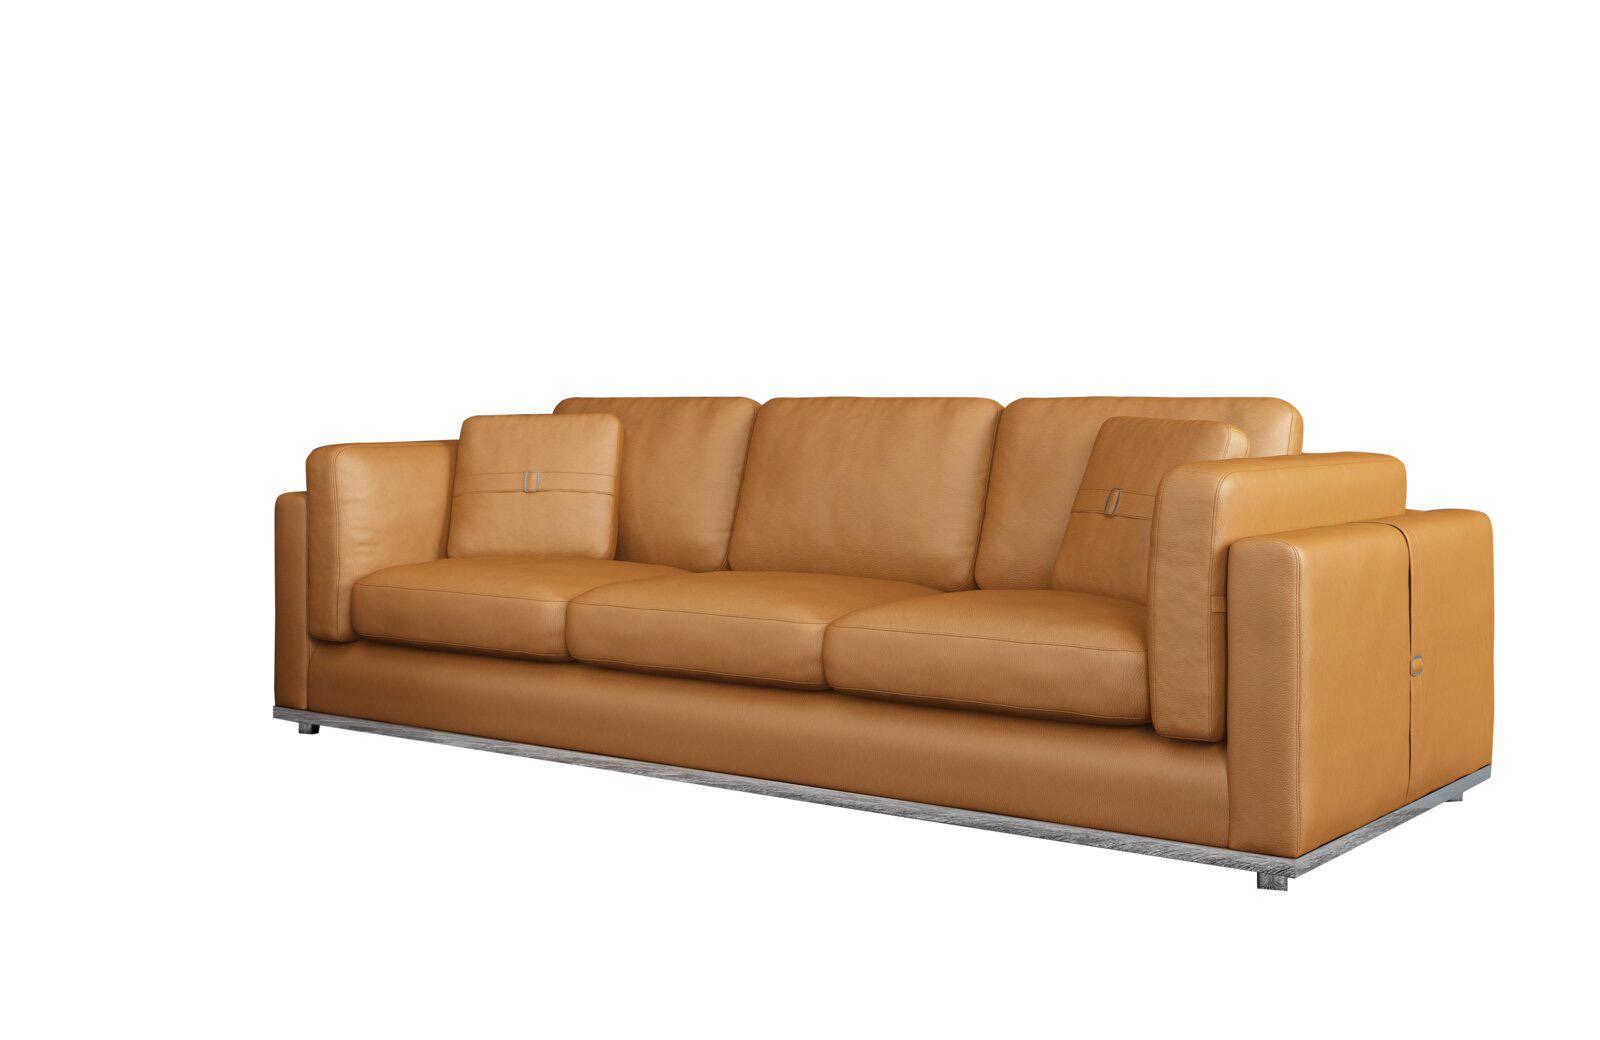 Contemporary, Modern Sofa PICASSO EF-25552-S in Cognac Leather